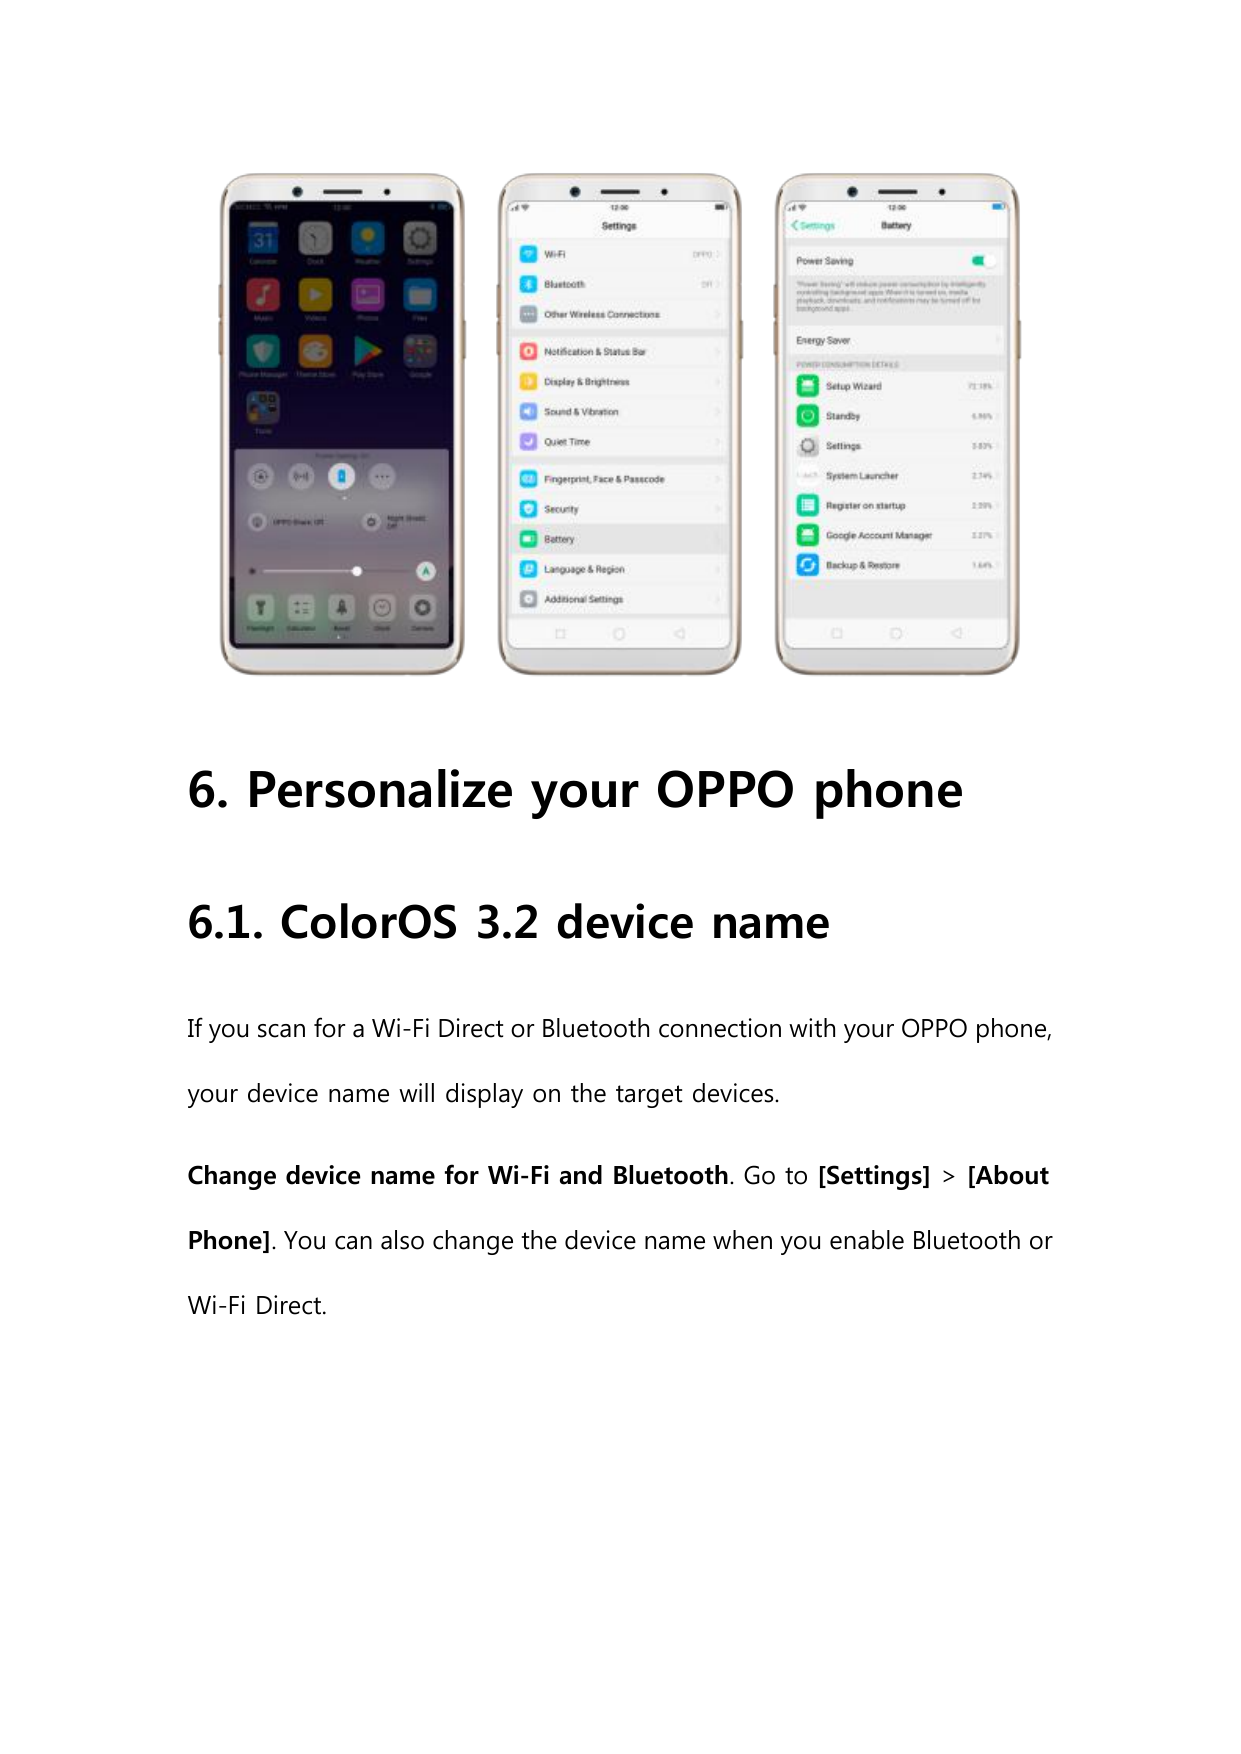 6. Personalize your OPPO phone6.1. ColorOS 3.2 device nameIf you scan for a Wi-Fi Direct or Bluetooth connection with your OPPO 